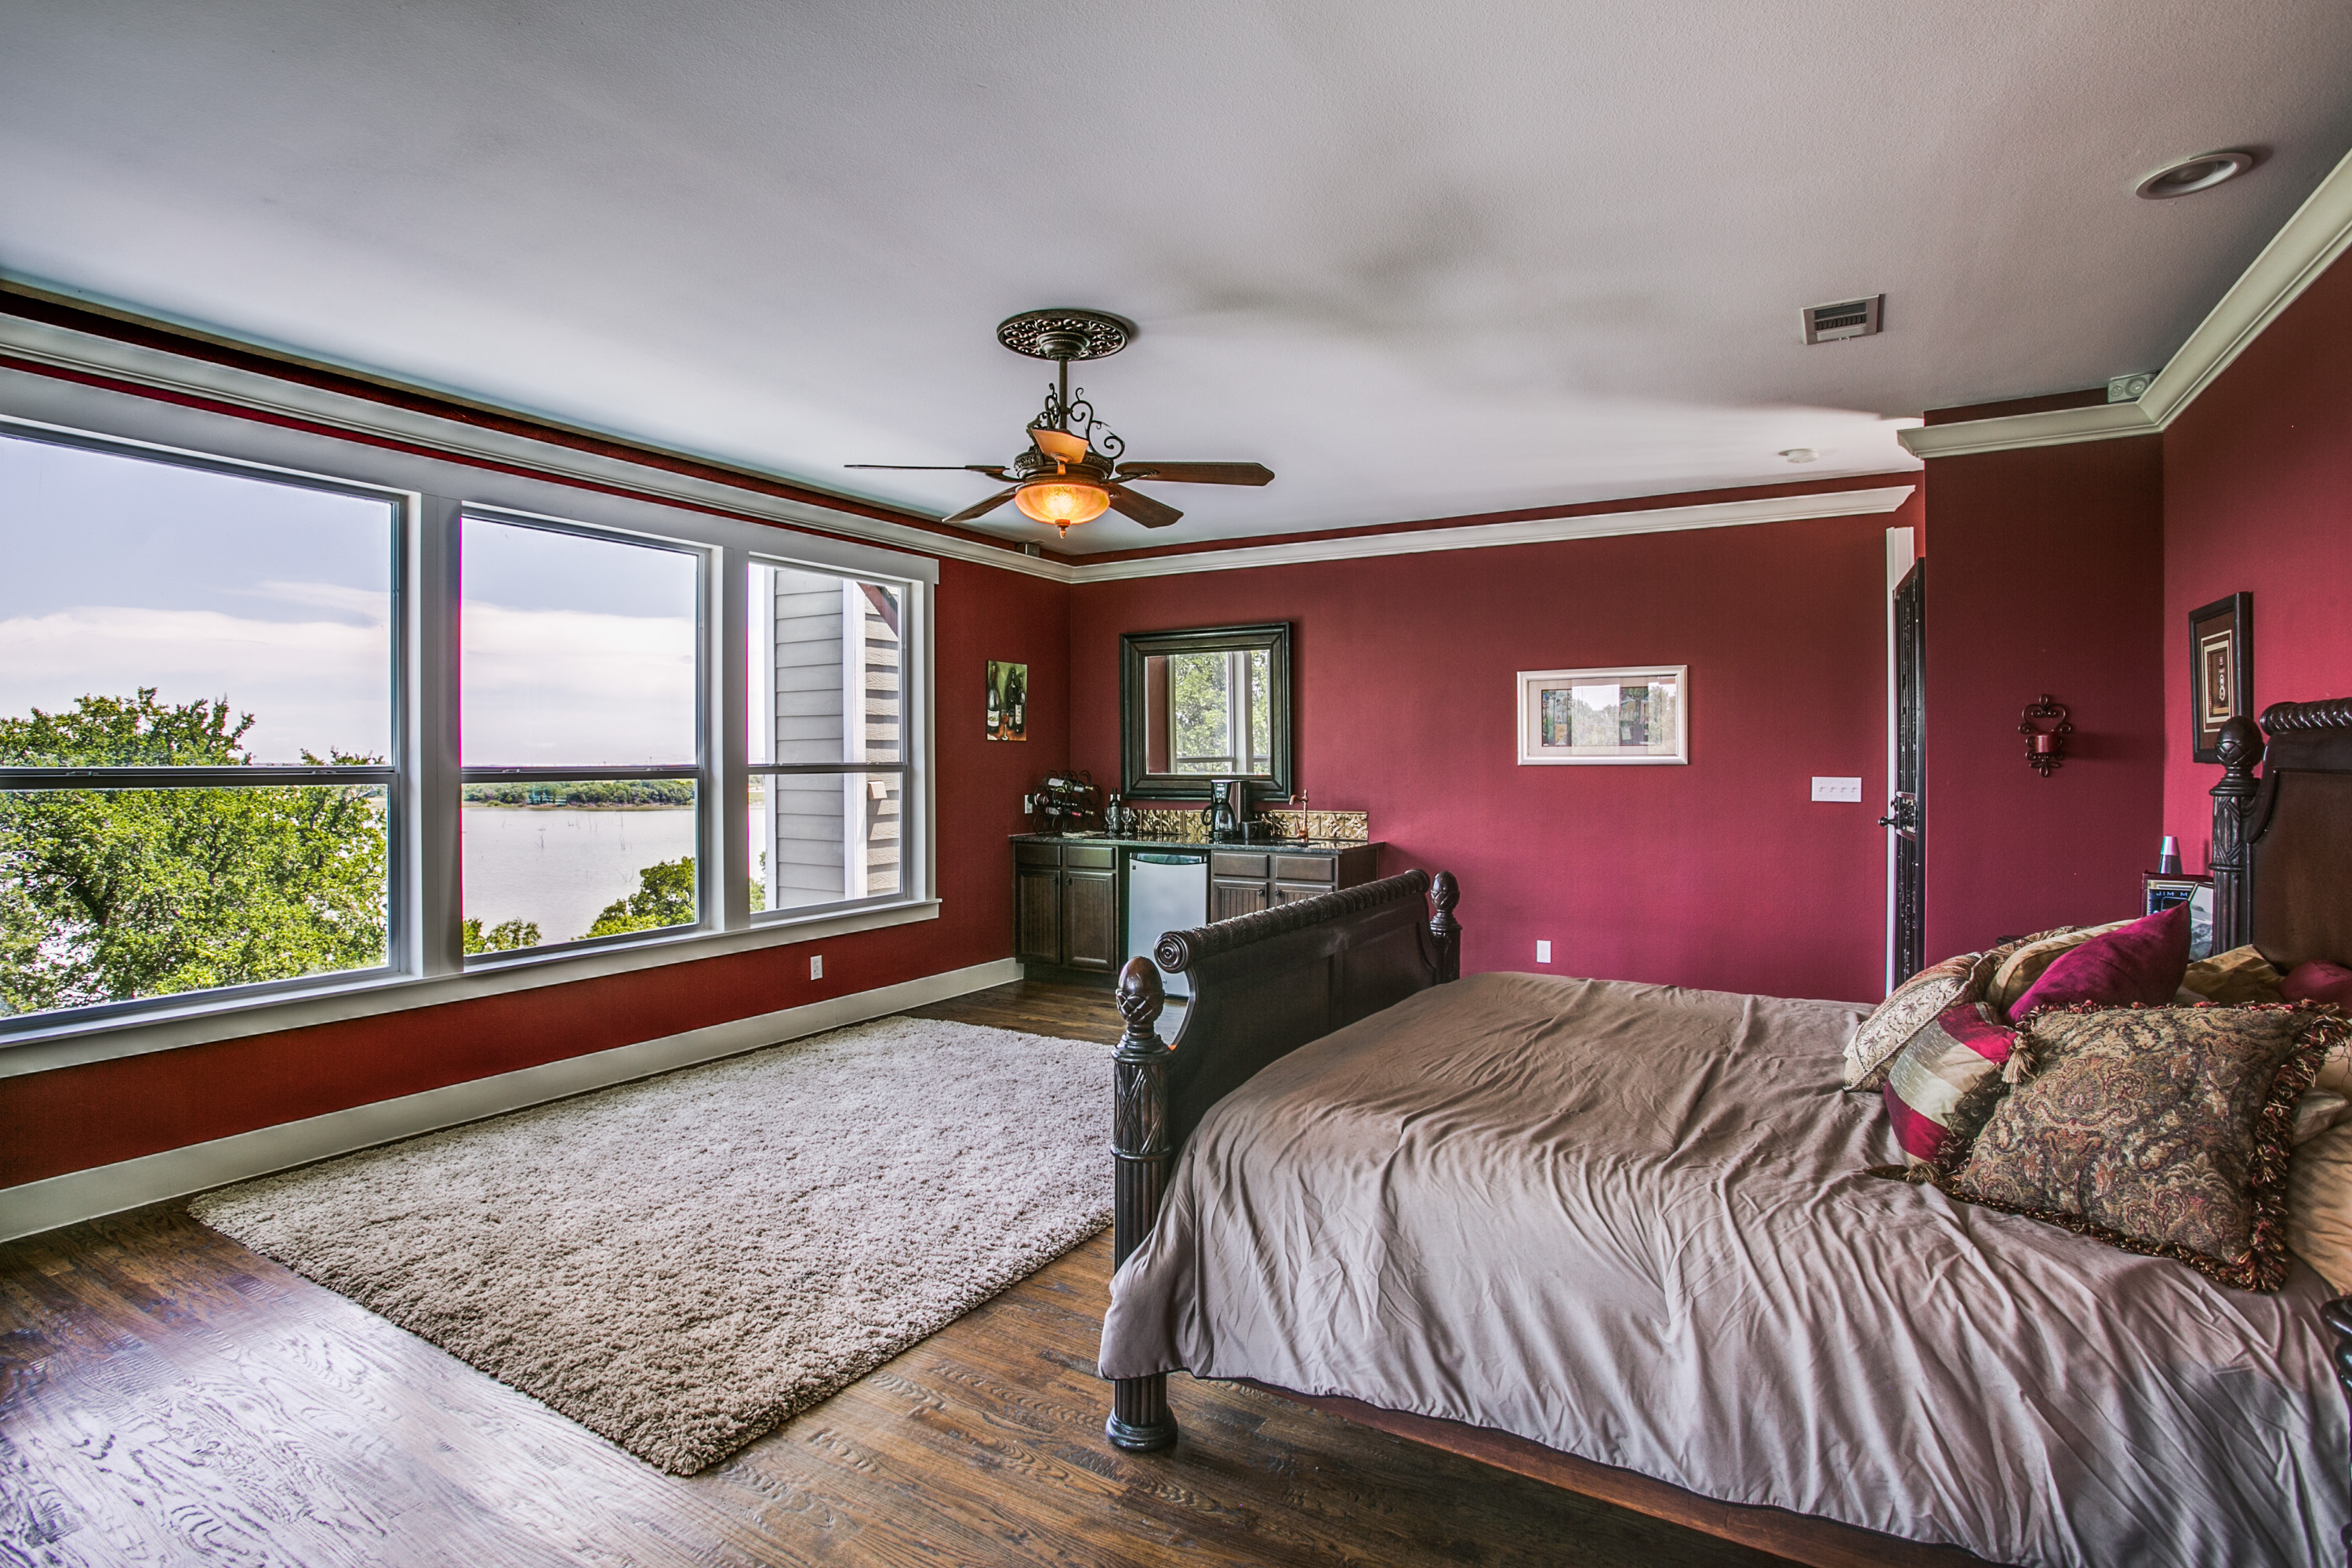 The entire 3rd floor houses the Master suite. You won't even have to leave your bedroom until you're ready to start your day. Grab coffee & breakfast from the custom coffee bar.  Wake up with the sunrise & what a view from this height!